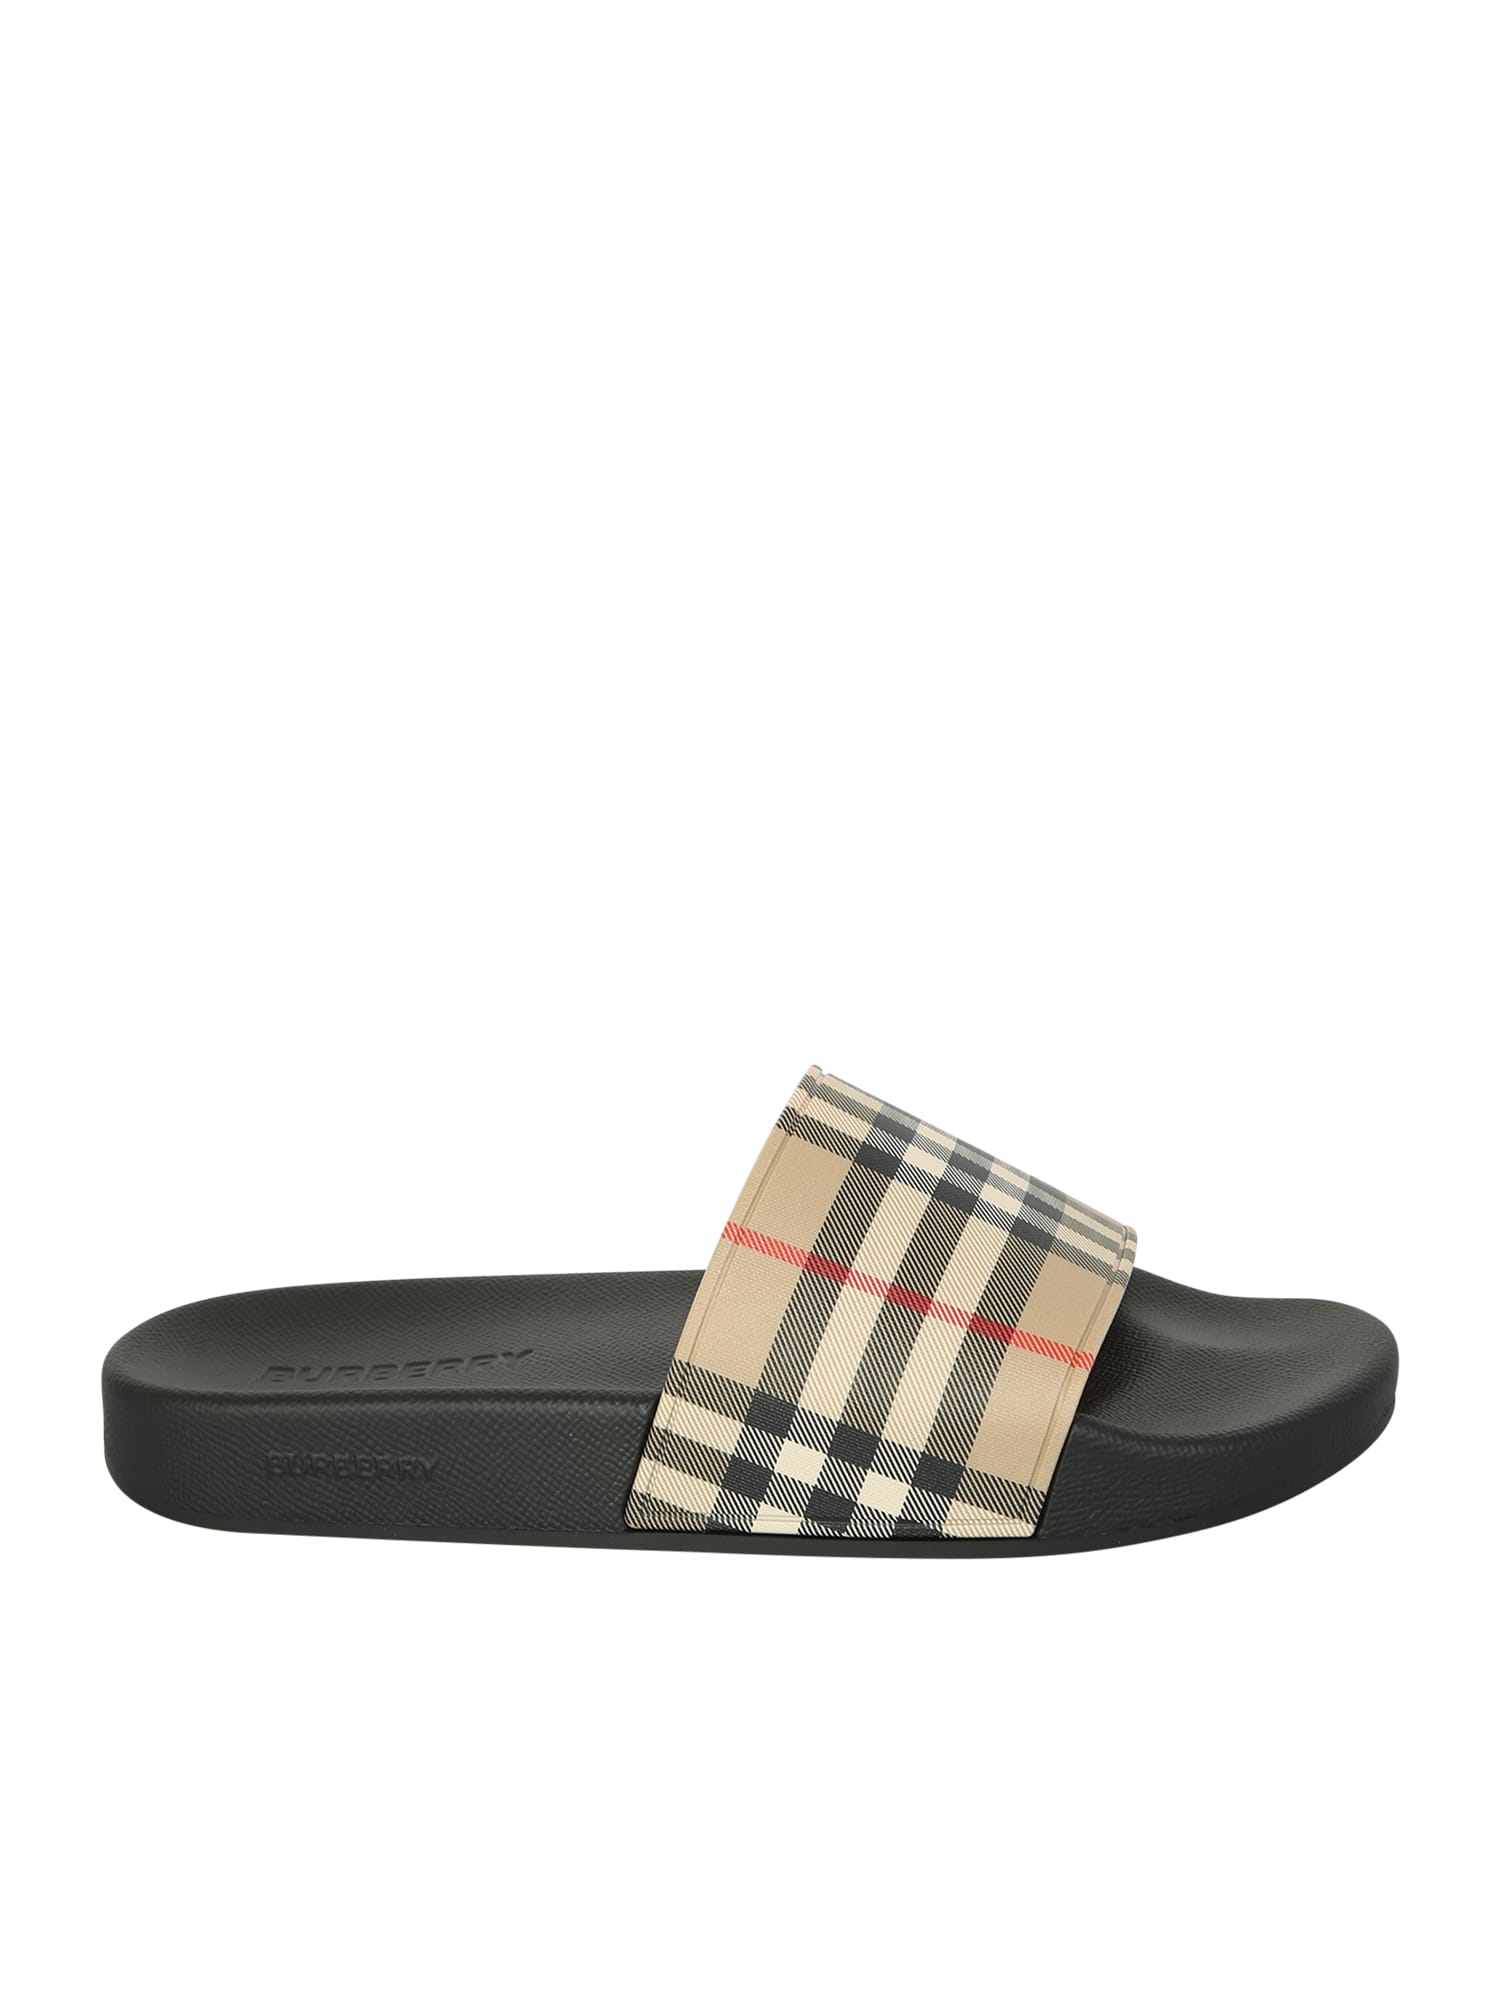 Burberry Contemporary, Cool And Vintage For The Checked Logo. Pool Slides Give A Casual Touch To The Look